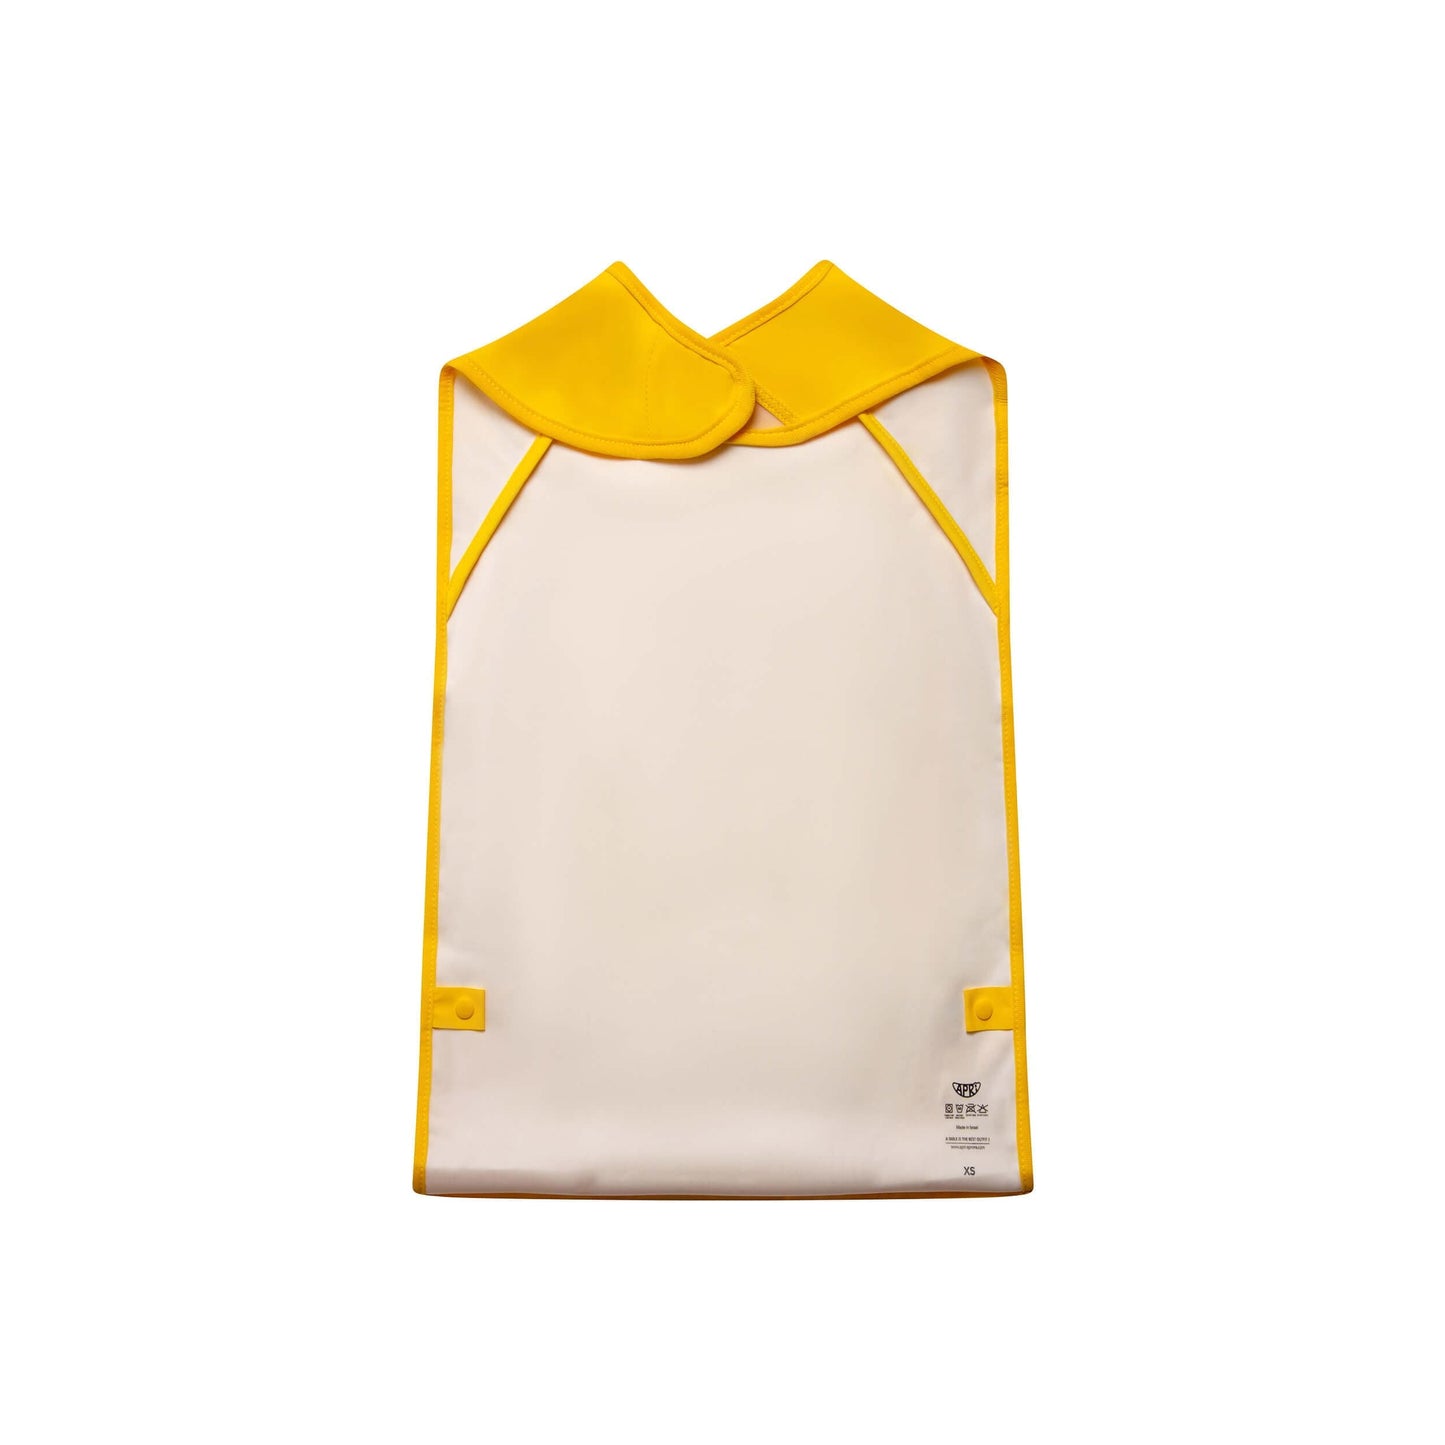 Apri Waterproof Bibs: Sunshine yellow, sleeveless for kids, teens, and adults. Features a food pocket and innovative fastener